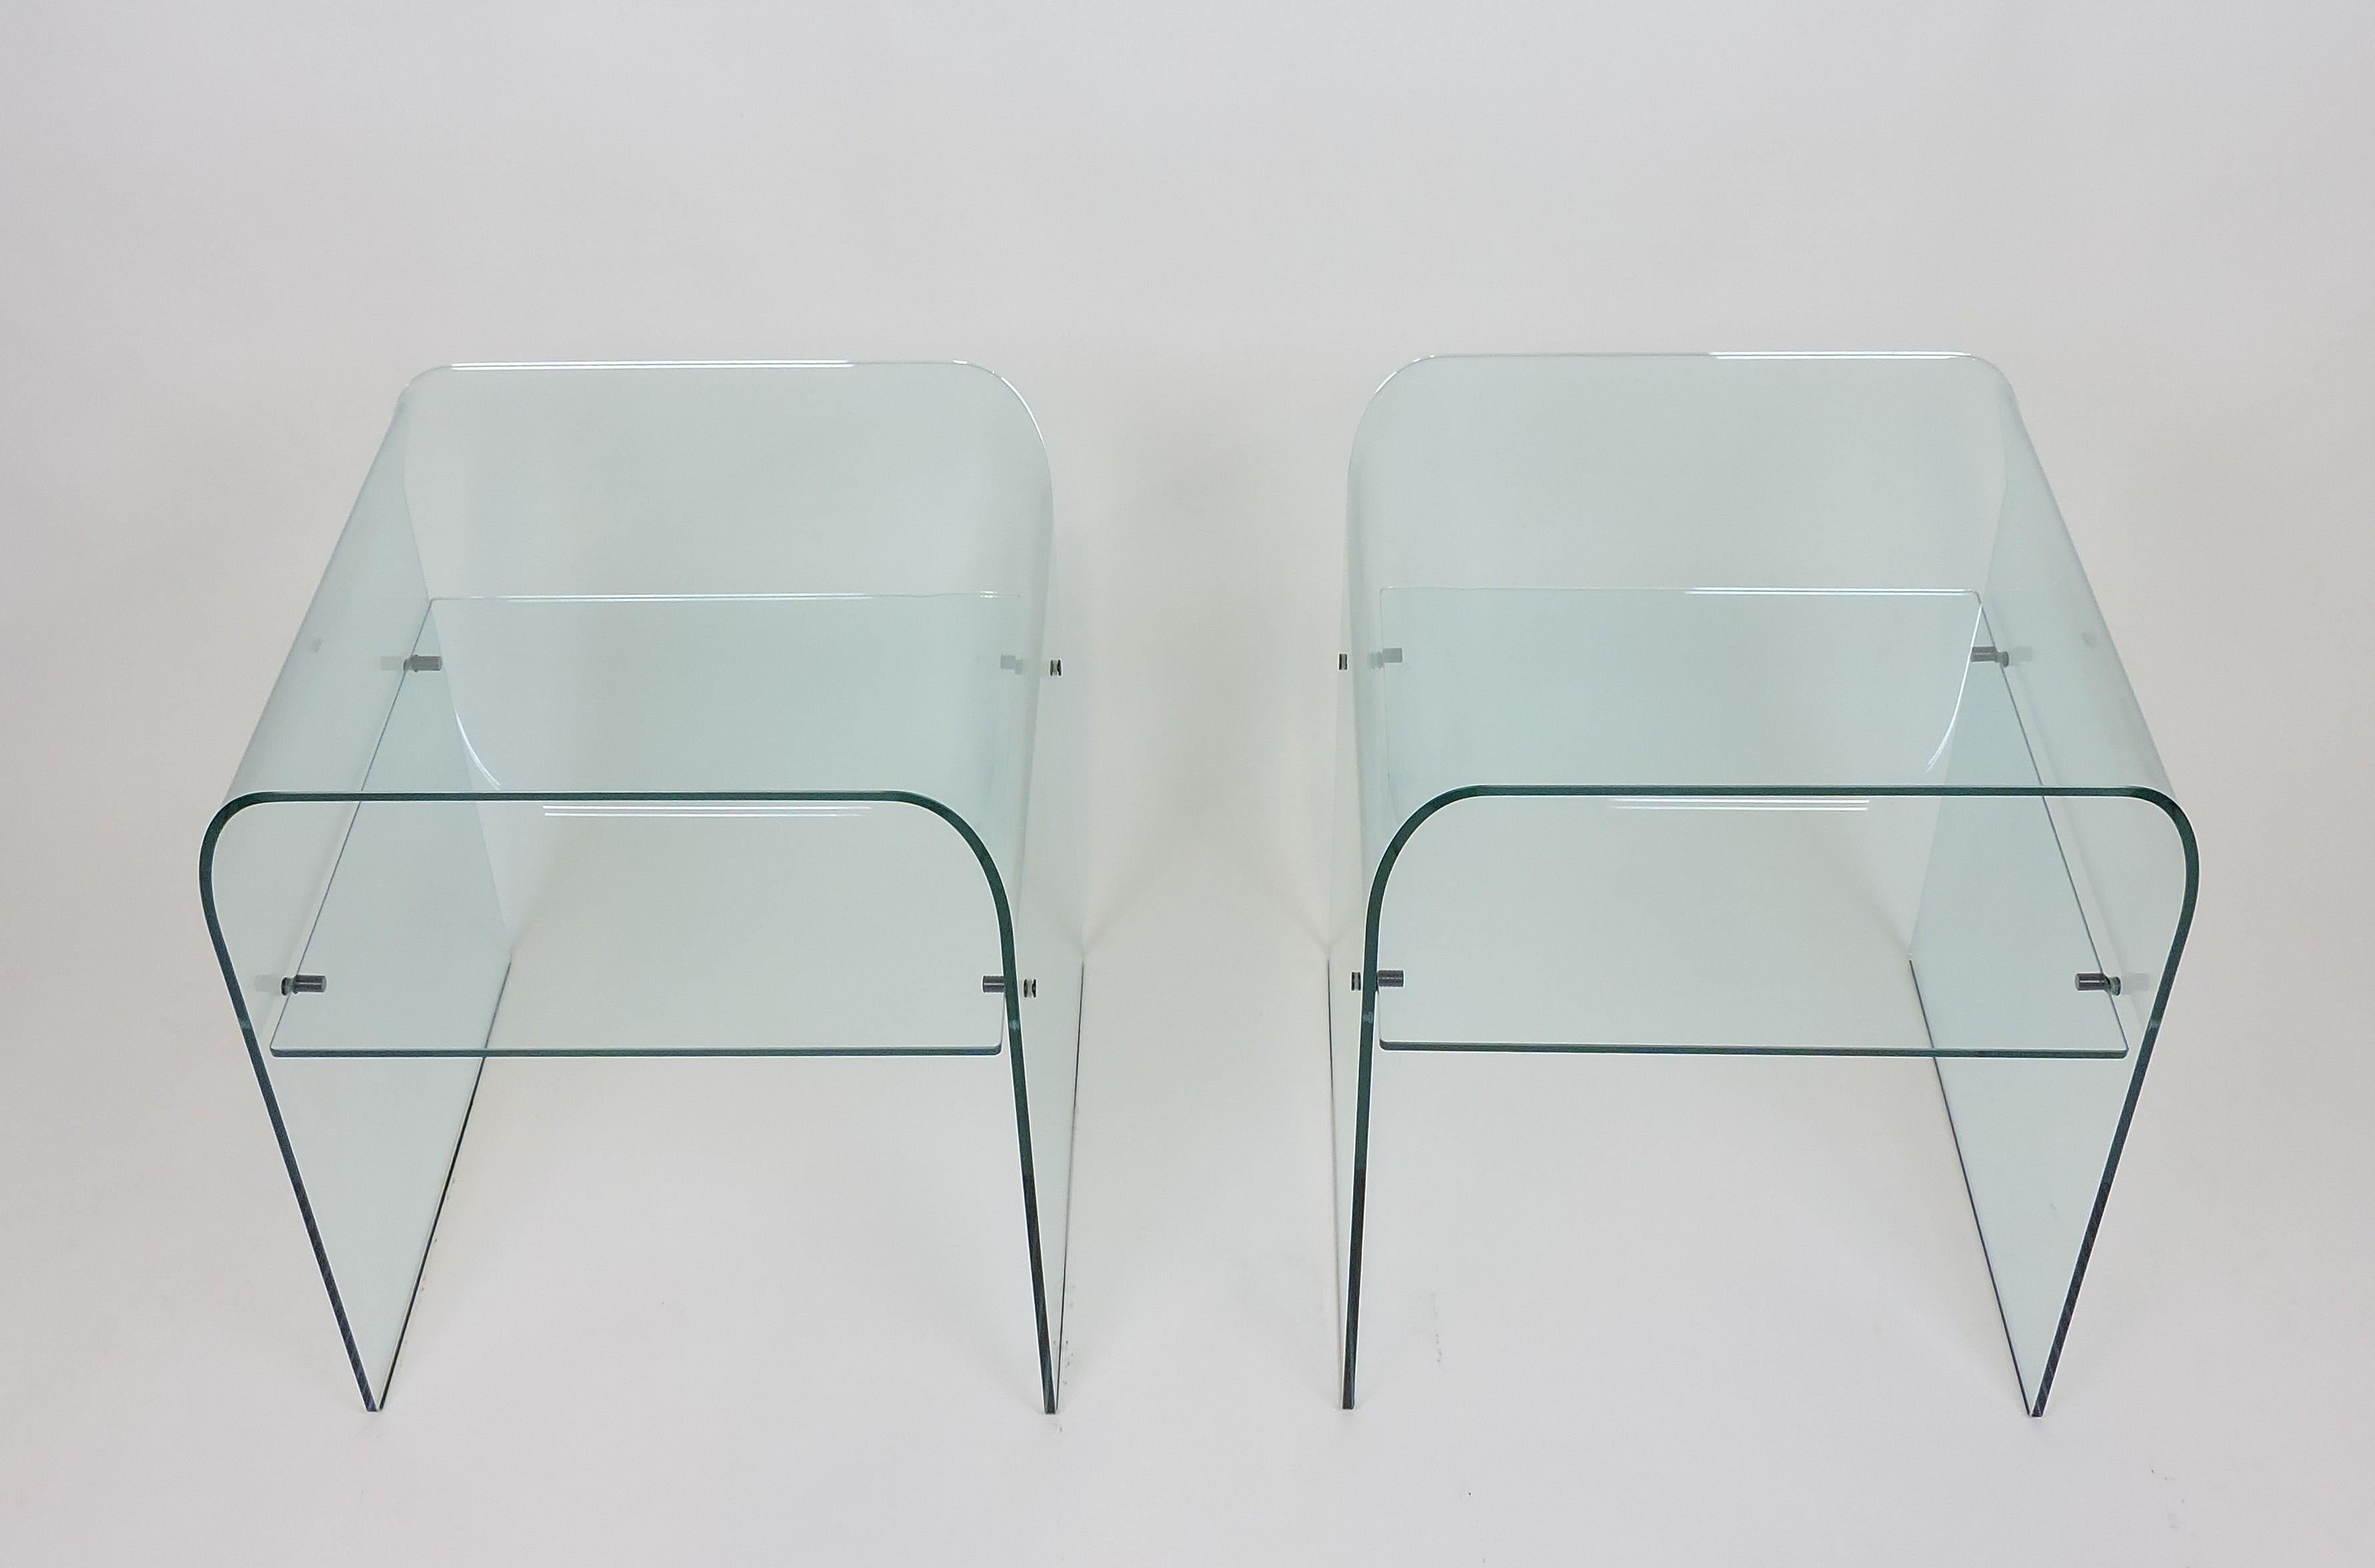 Beautiful set of two end tables or nightstands manufactured in Italy by Fiam Italia. These high quality tables are made of clear curved glass and are perfect for when you don't want a lot of visual weight. Both have removable glass shelves, plastic